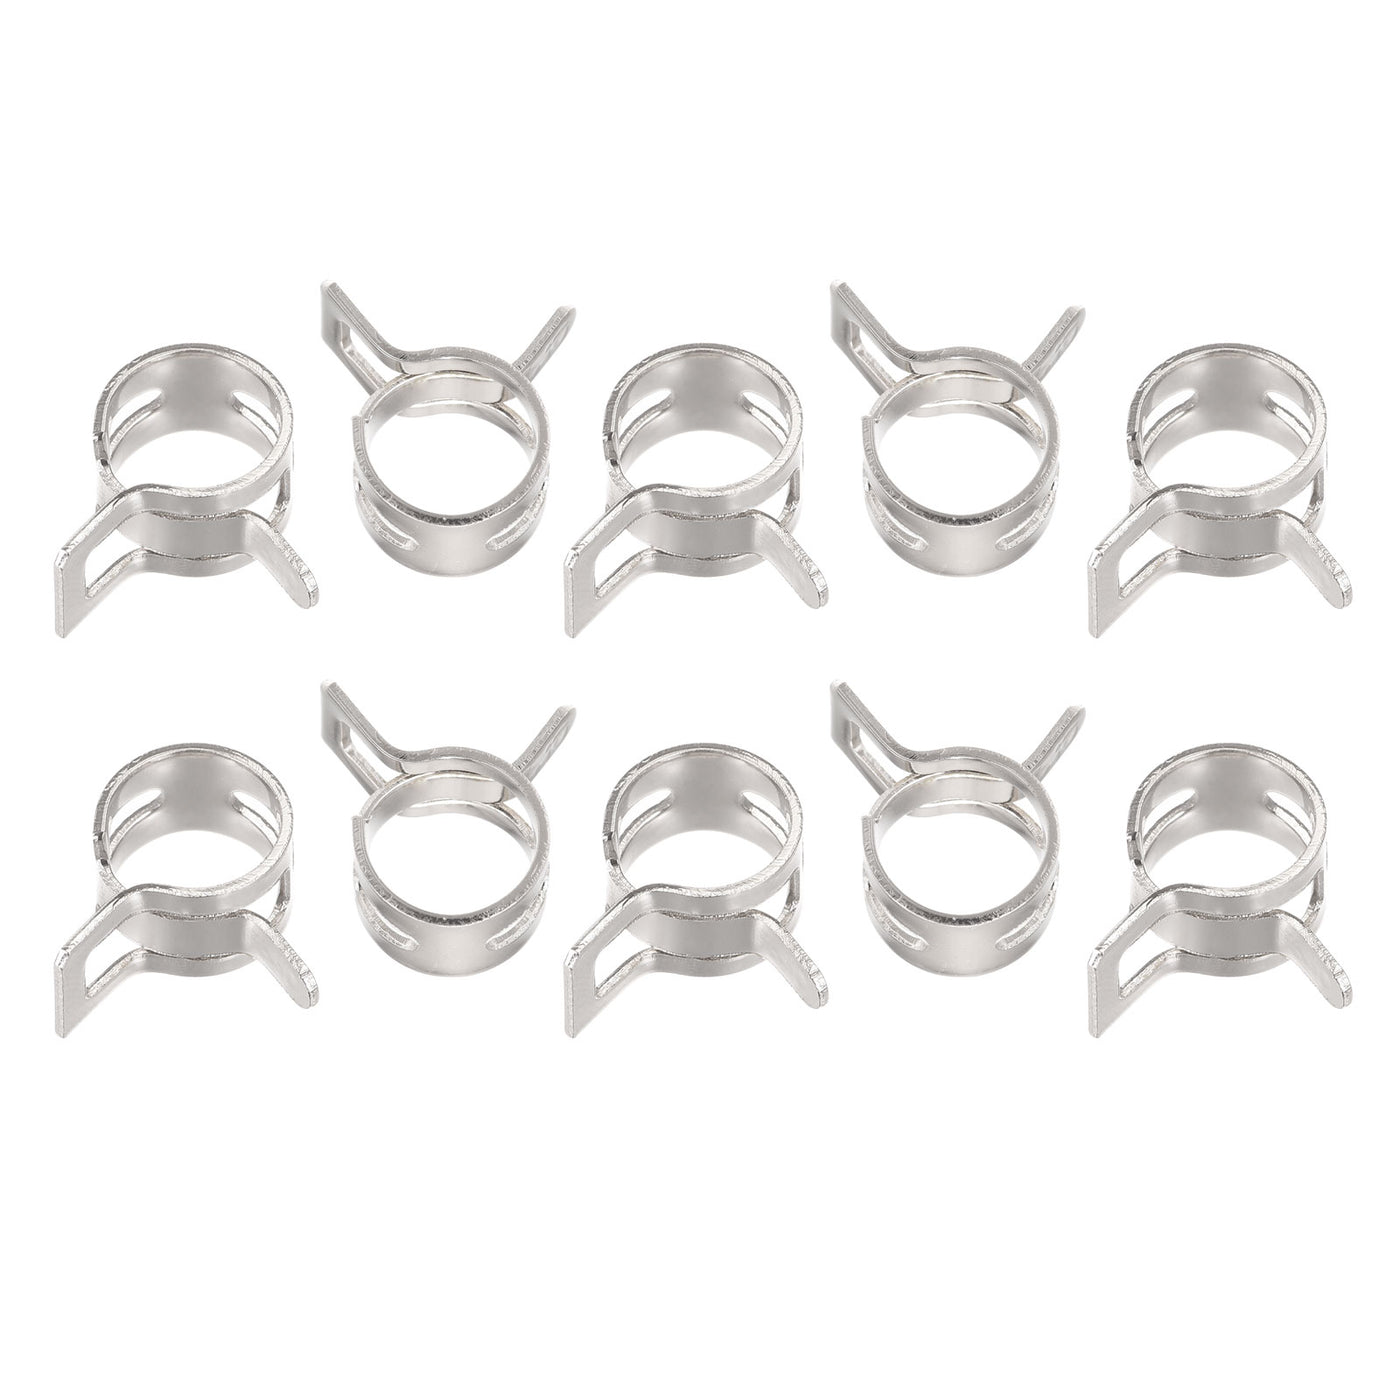 Uxcell Uxcell Spring Hose Clamp, 50pcs 65Mn Steel 15mm Low Pressure Air Clip, Nickel Plated